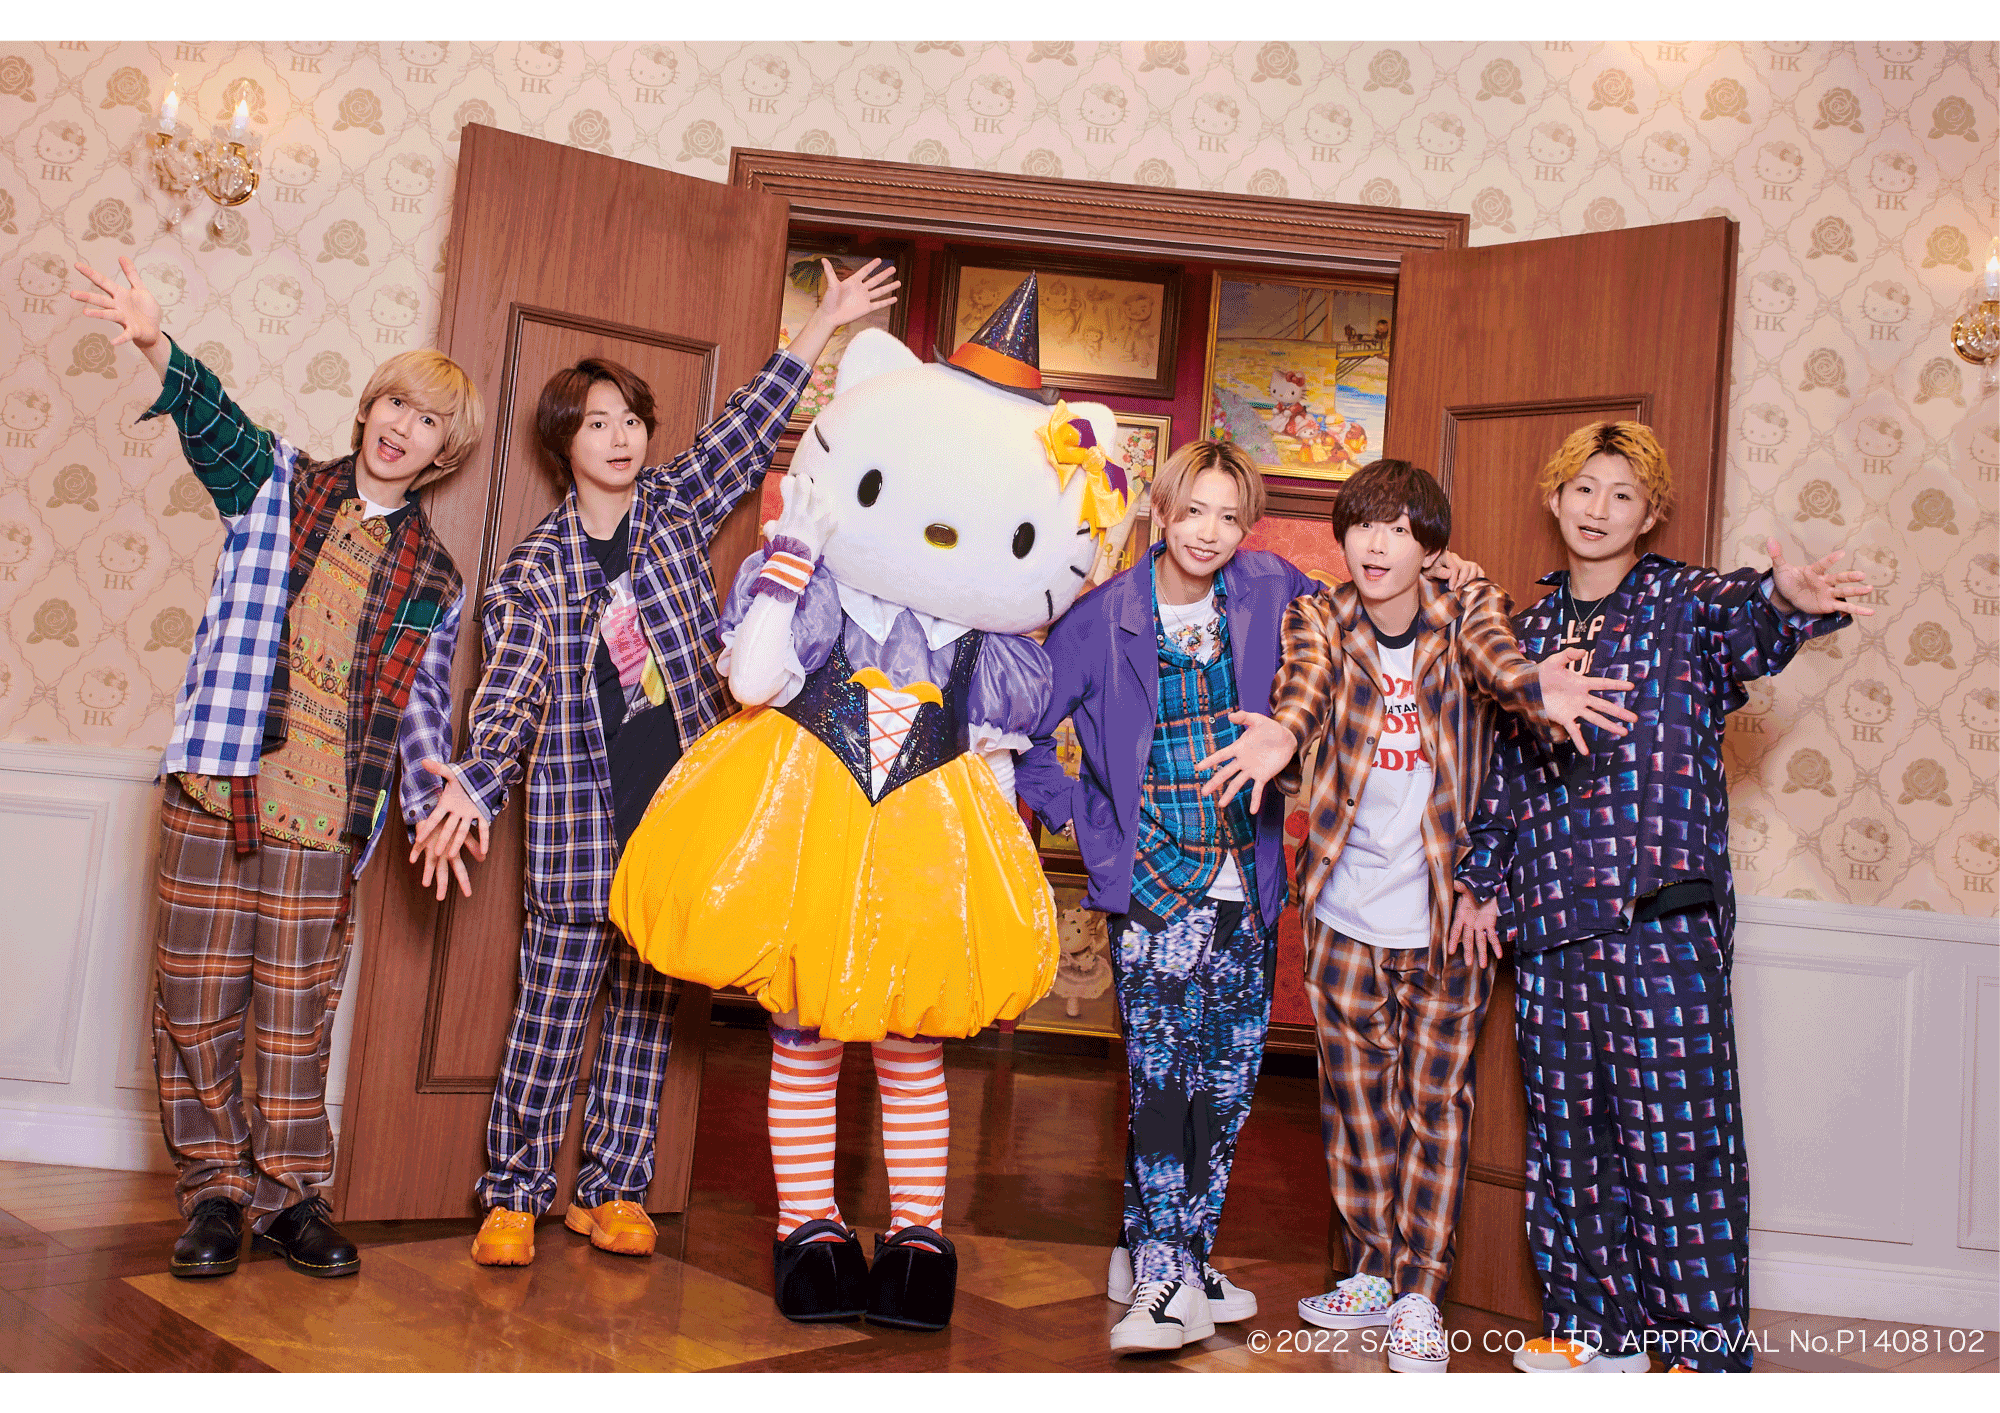 【NEWS】10/16(日)に『CUBERS Halloween Special Live 2022 in サンリオピューロランド』開催決定！！